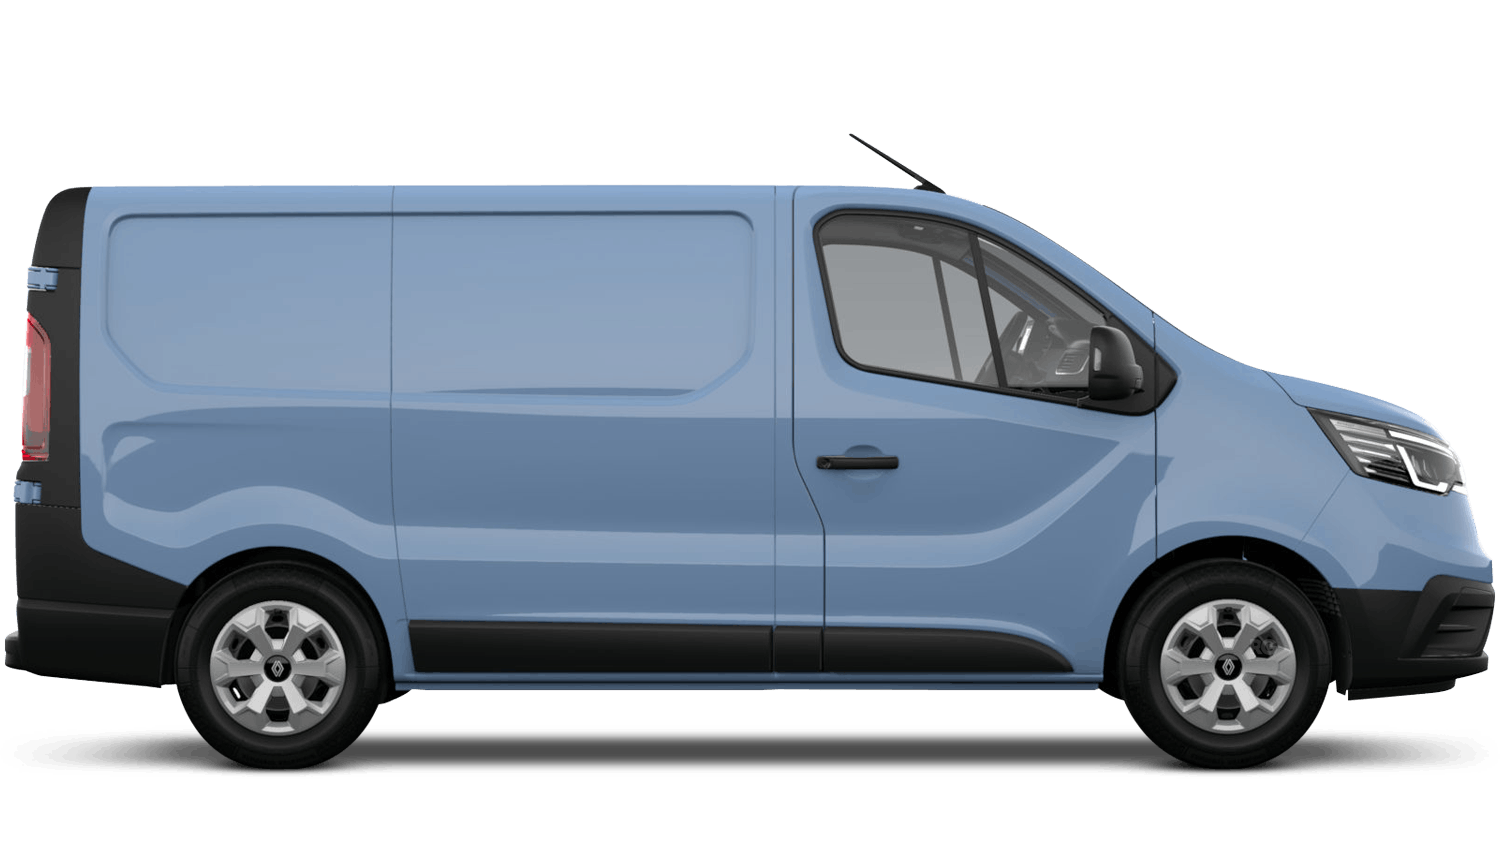 Renault Trafic E-Tech 100% electric Hire Purchase Offer